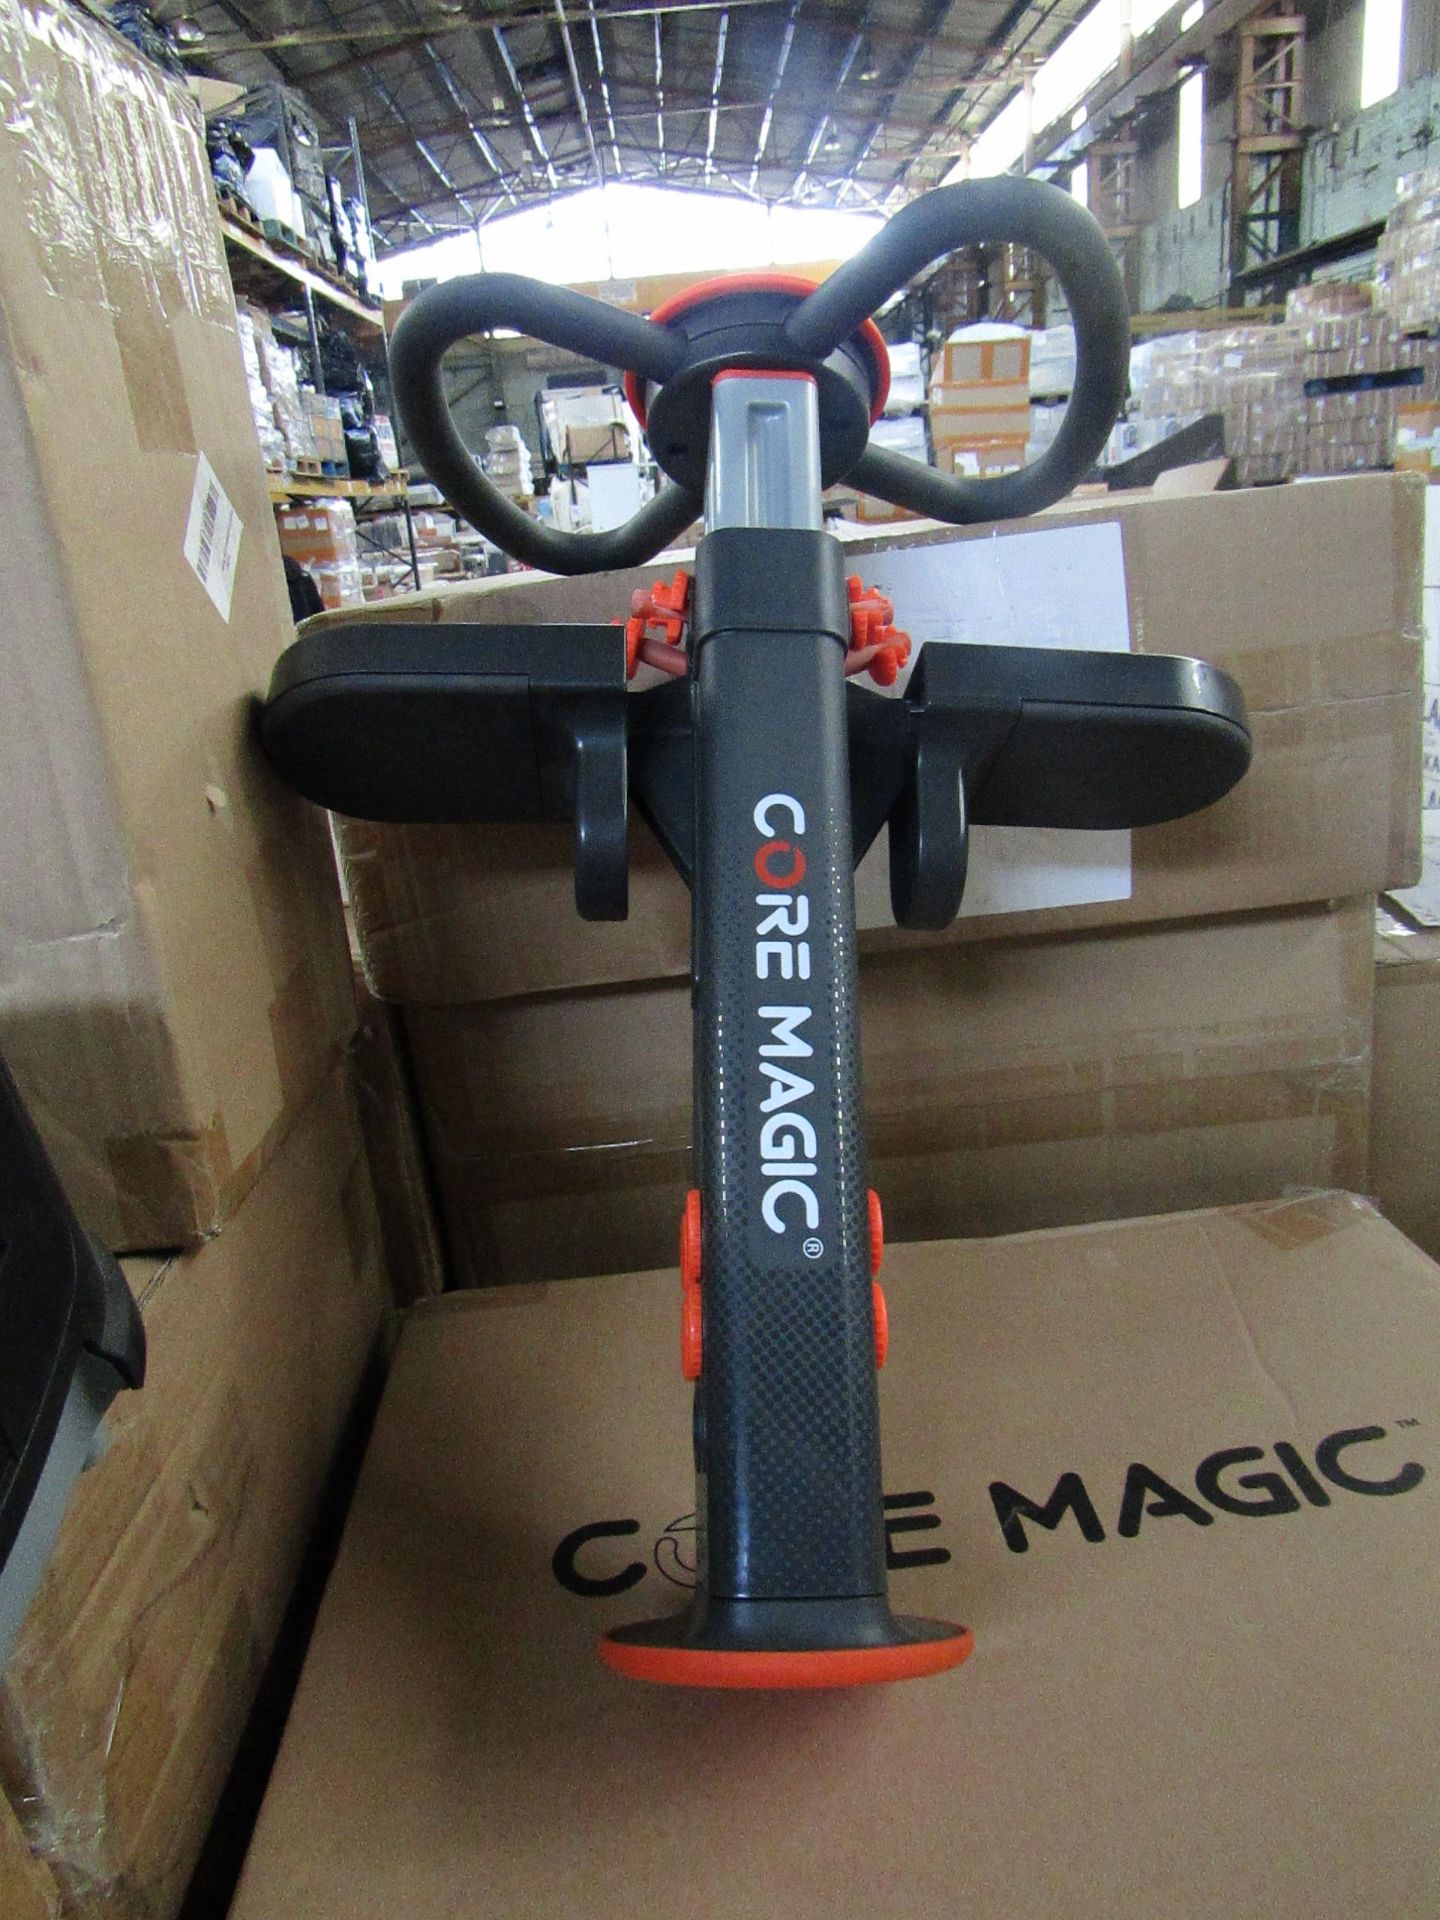 | 1X | CORE MAGIC EXERCISE MACHINE | REFURBISHED & BOXED | NO ONLINE RESALE ALLOWED | RRP ?59.99 |